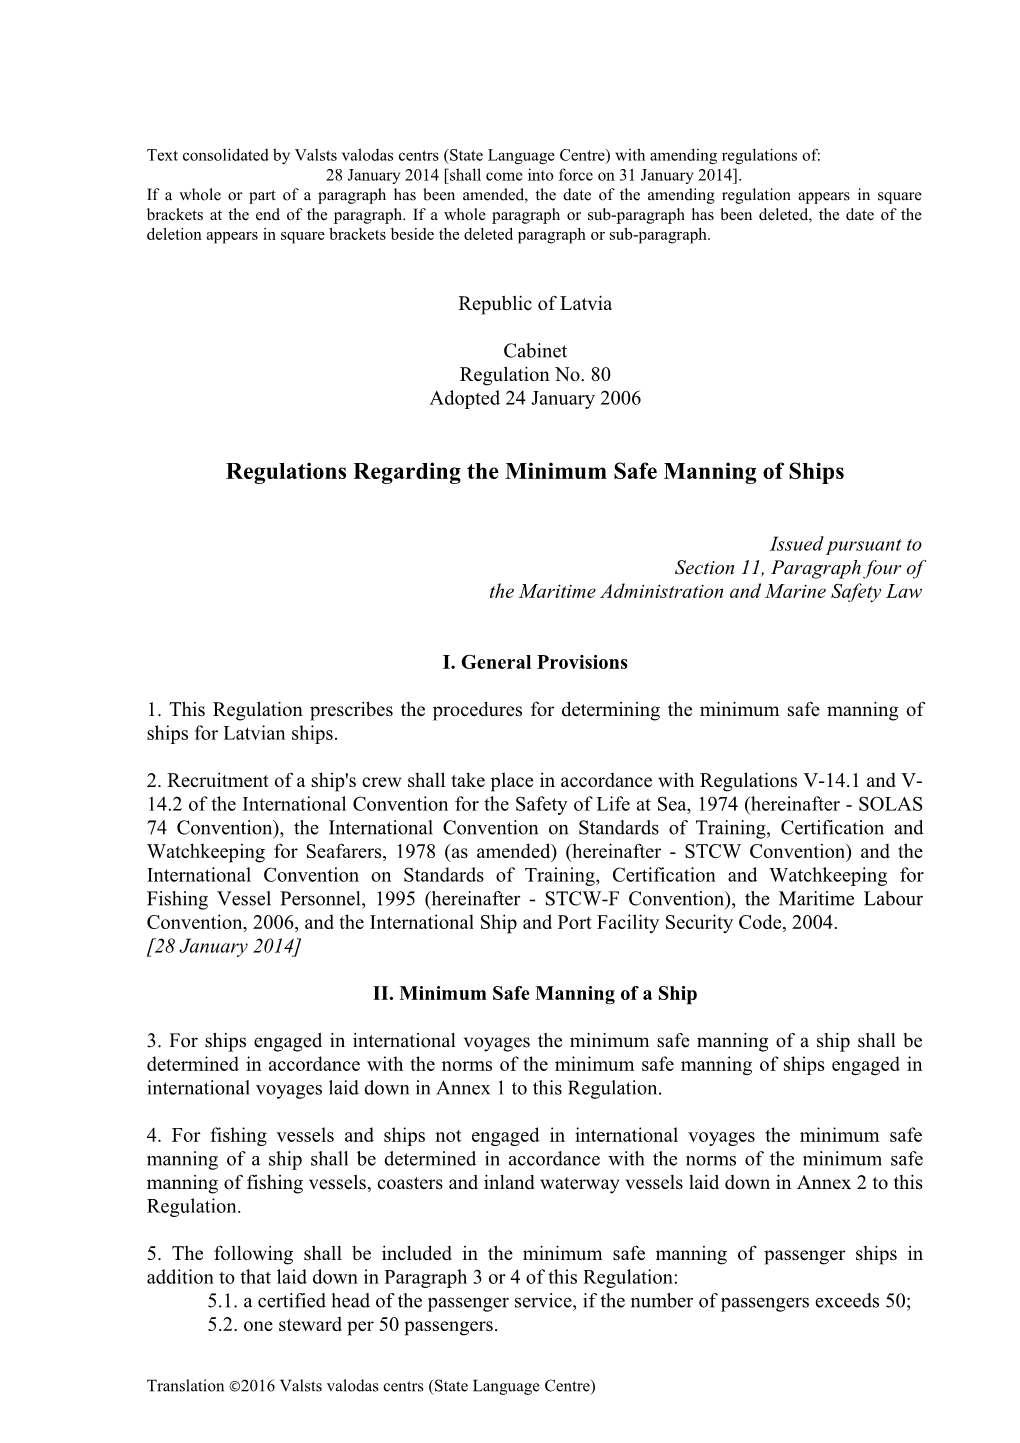 Text Consolidated by Valsts Valodas Centrs (State Language Centre) with Amending Regulations Of s3